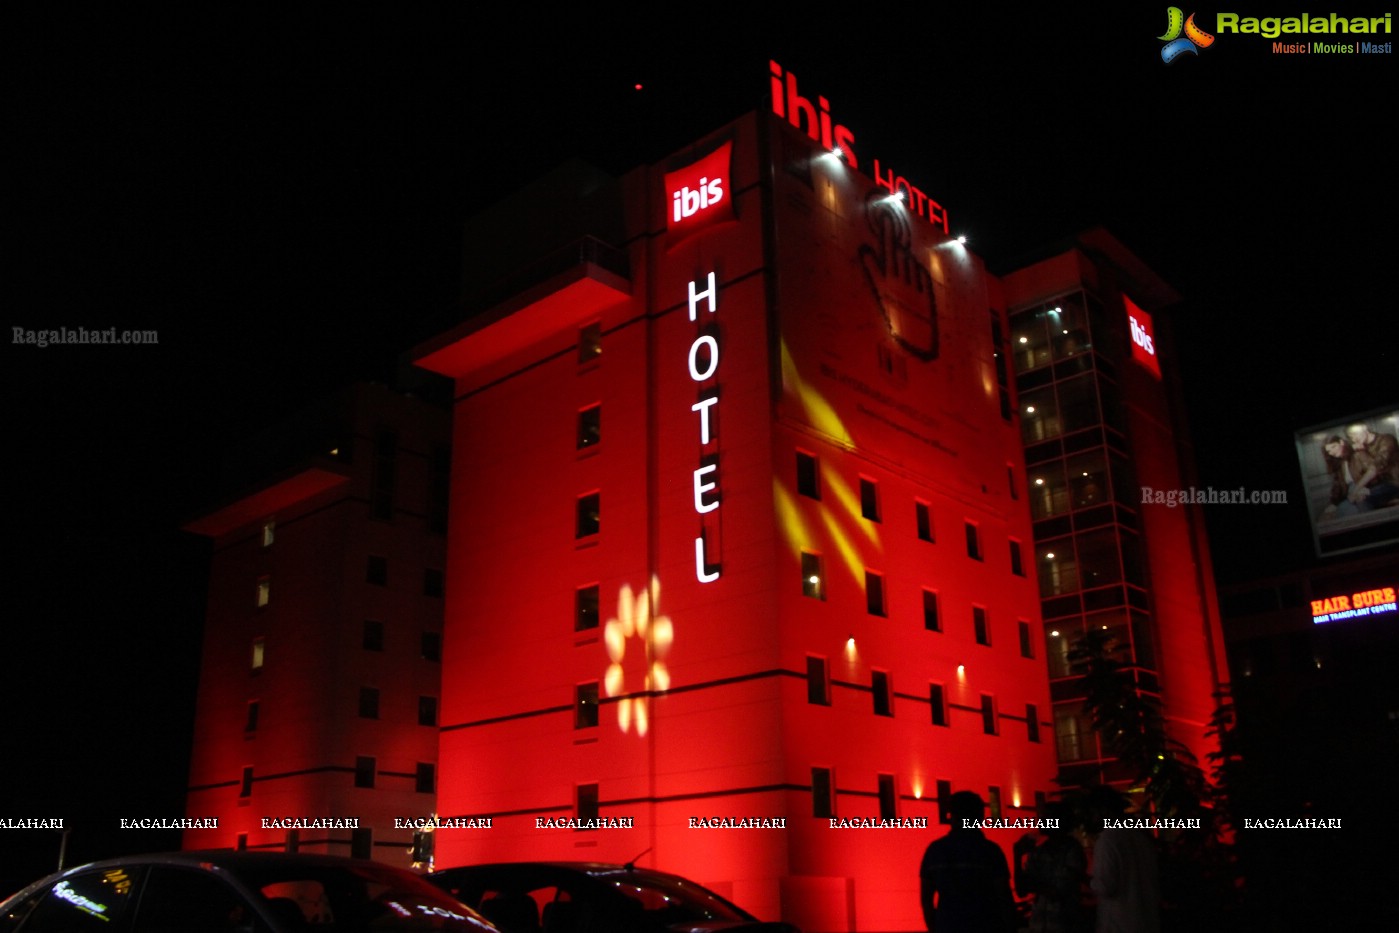 Grand Launch Party by ibis Hyderabad Hitech City